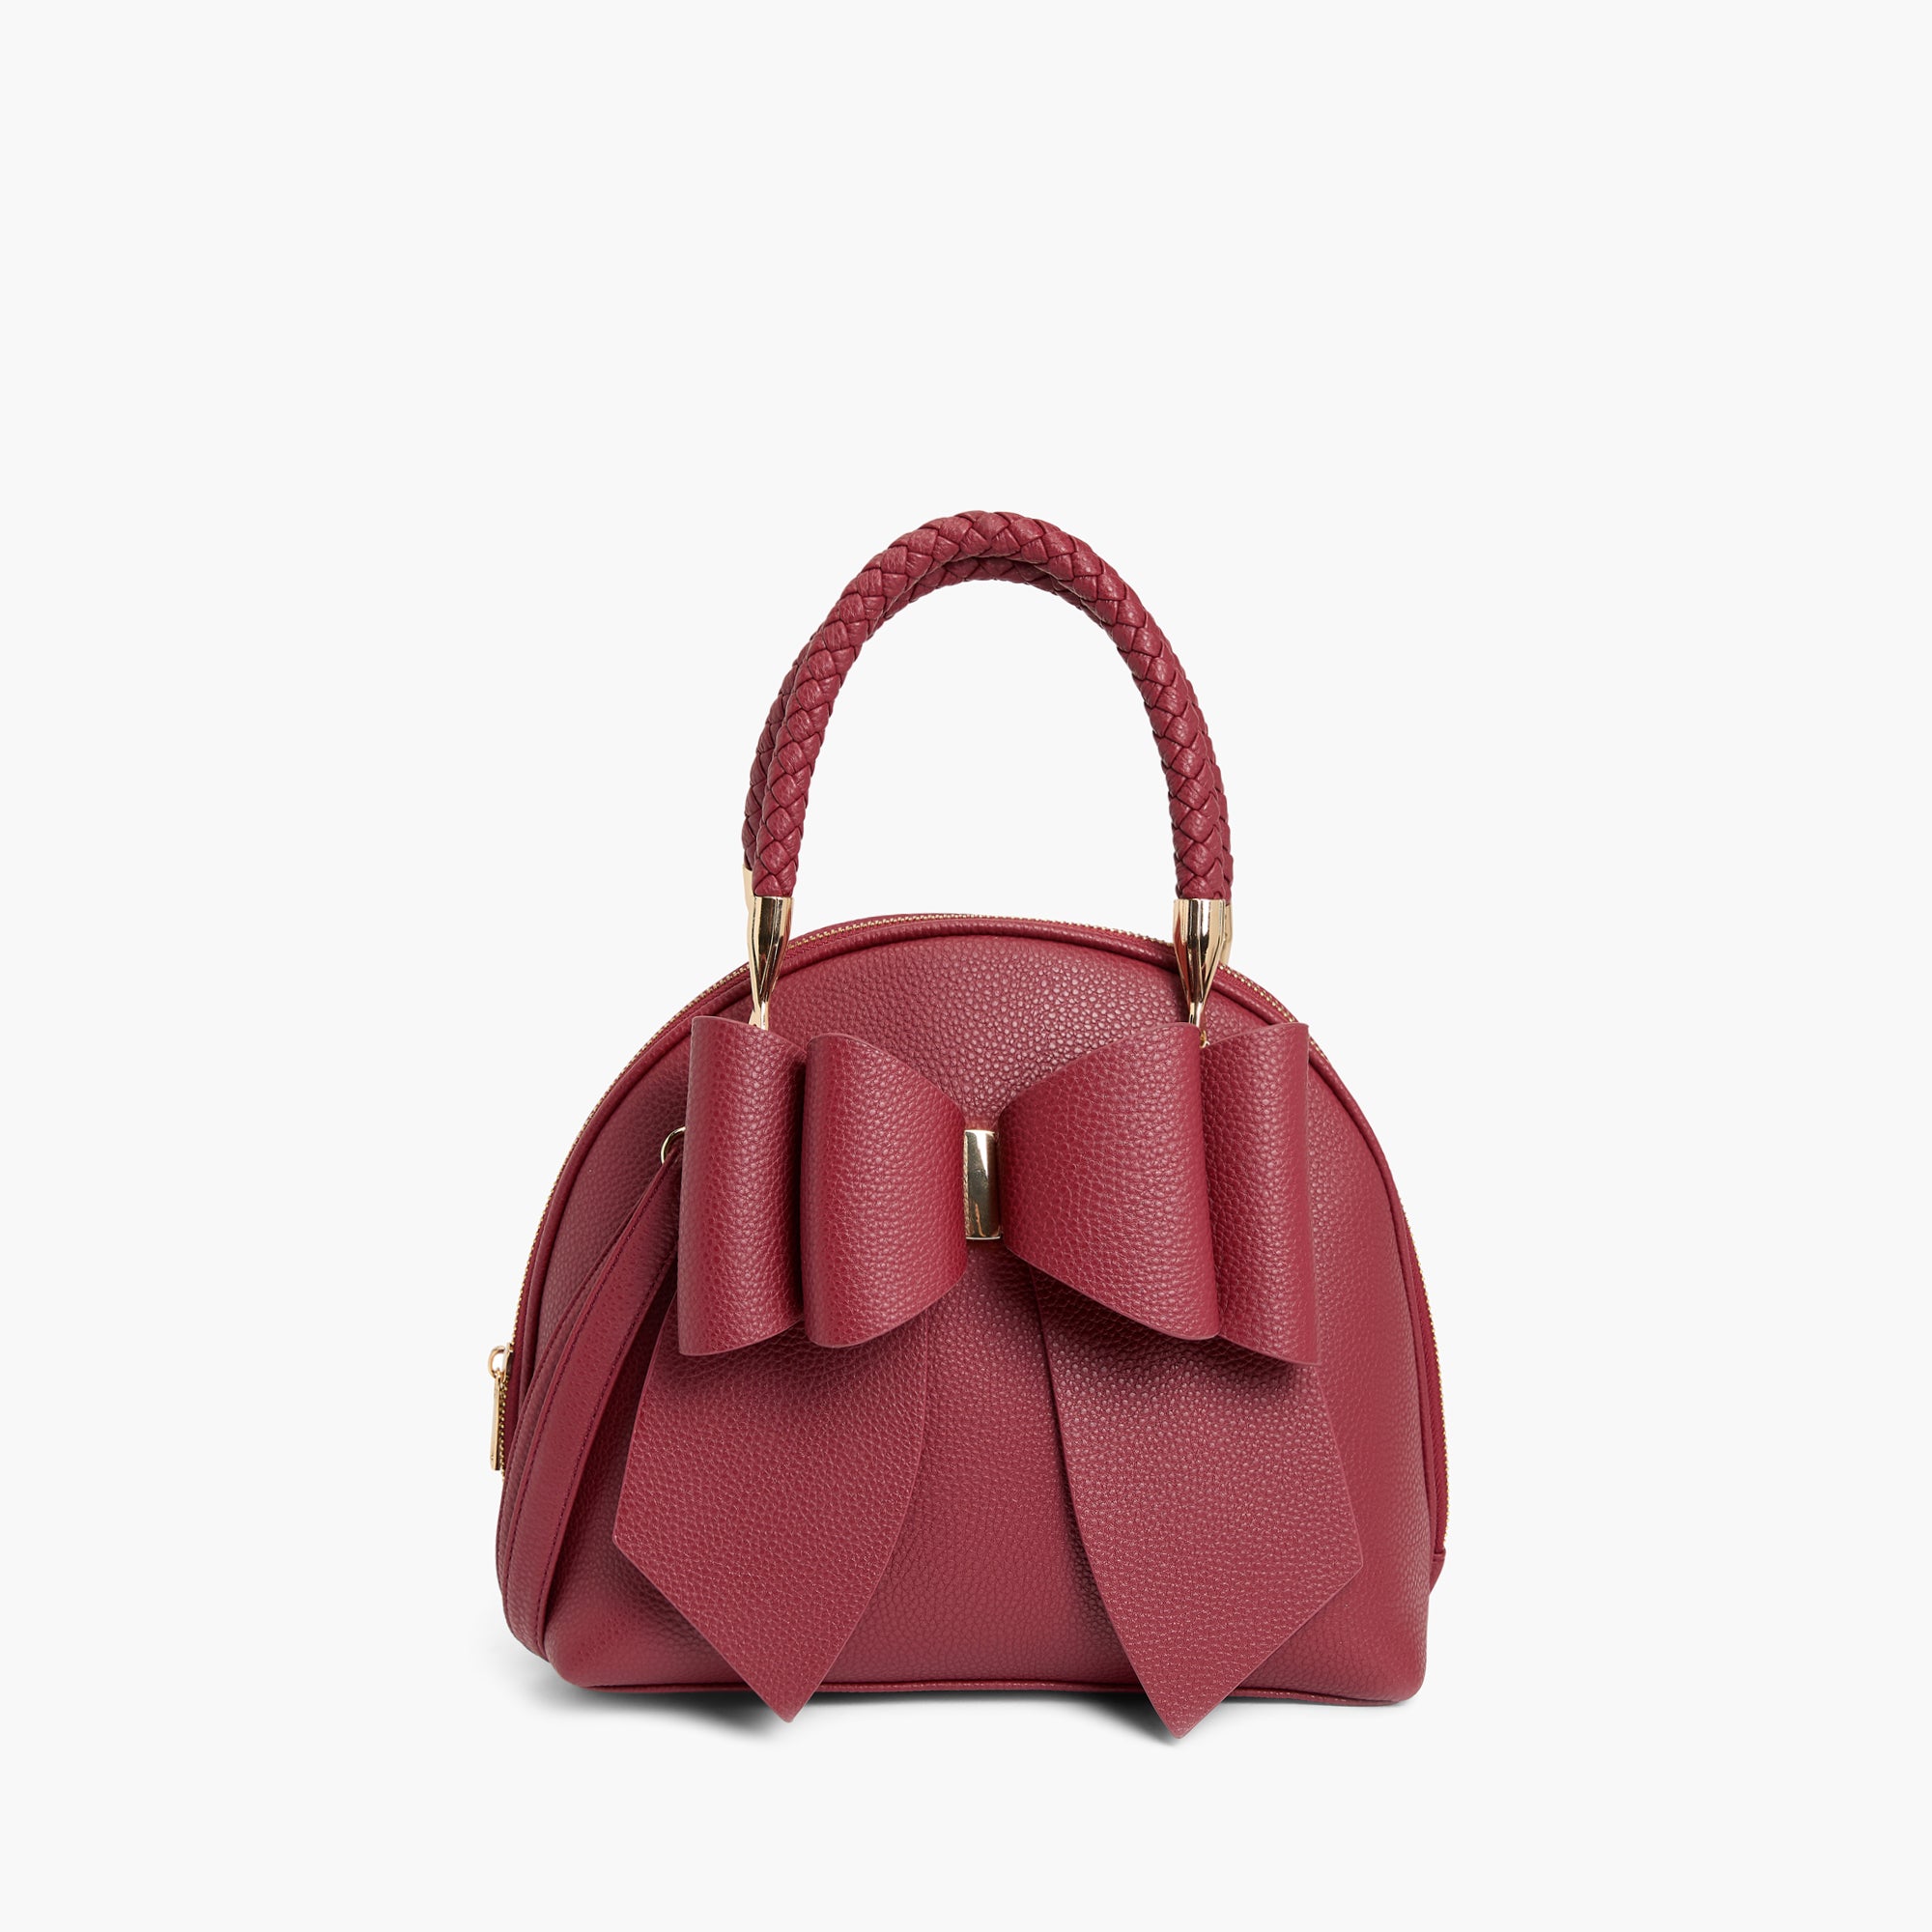 The Top Handle Bow Bag